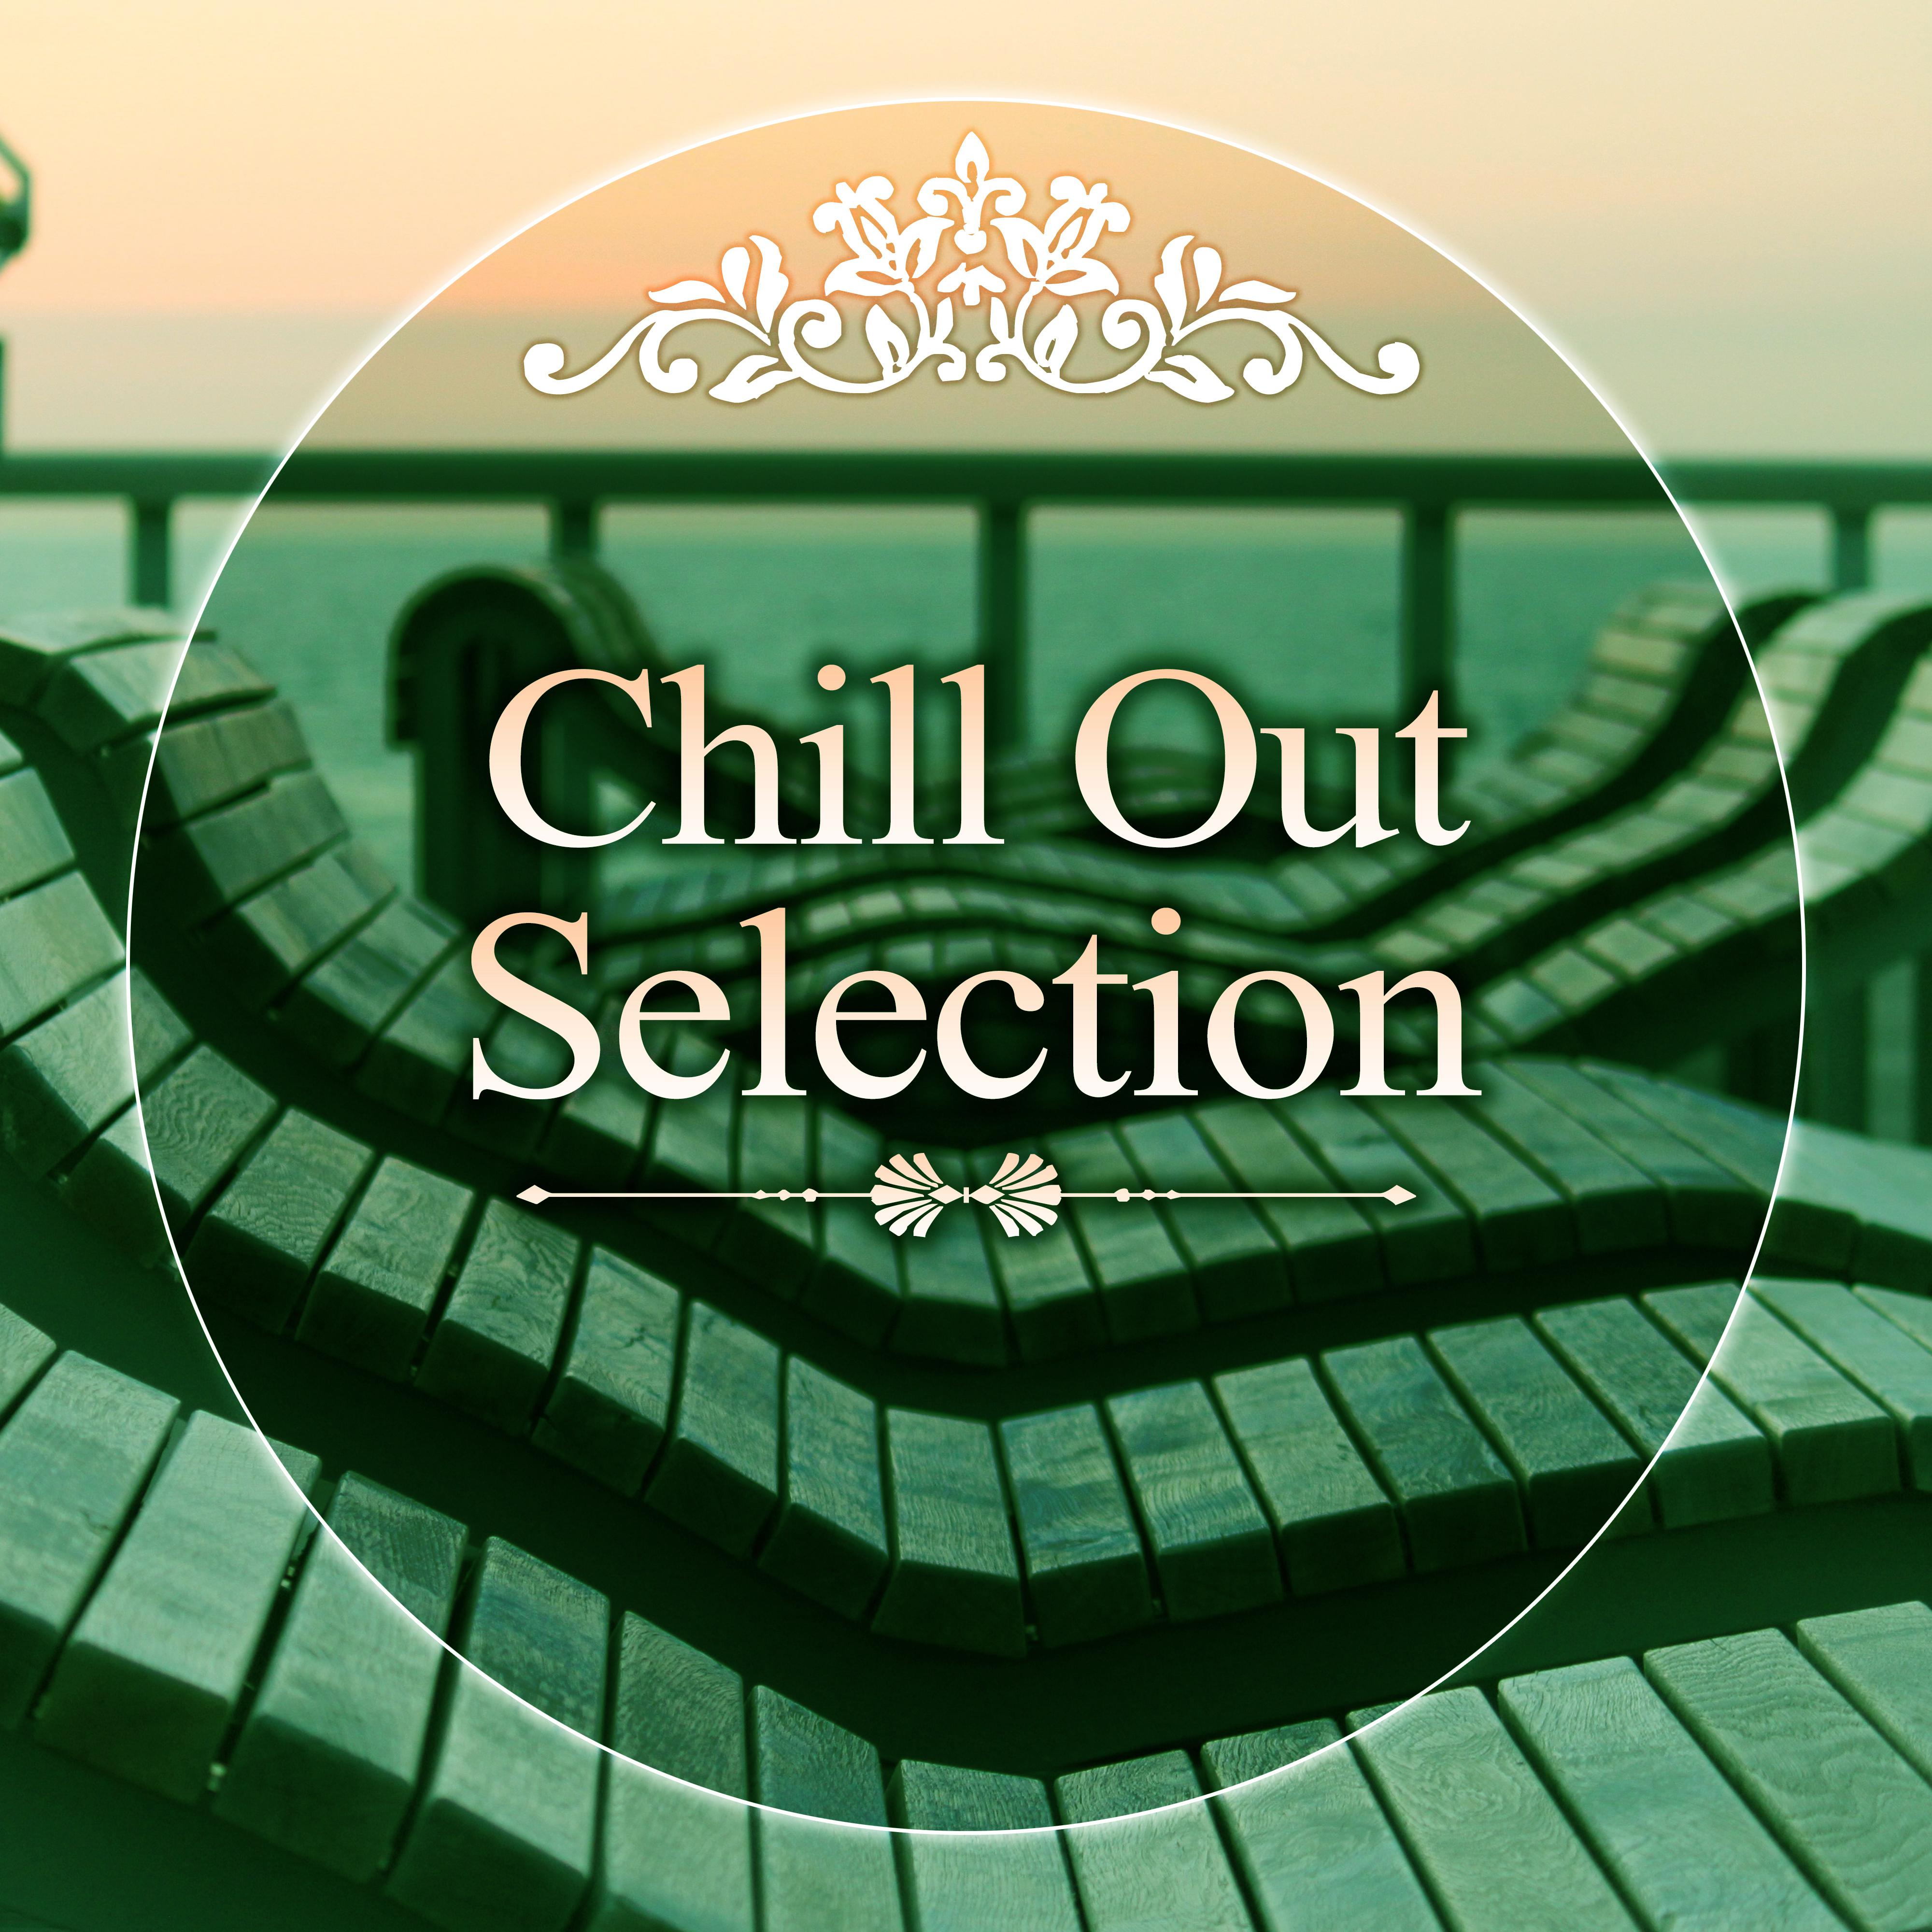 Chill Out Selection - Weekend Chill Out, Chill Out Lounge, Cafe Ibiza Chillout 2016